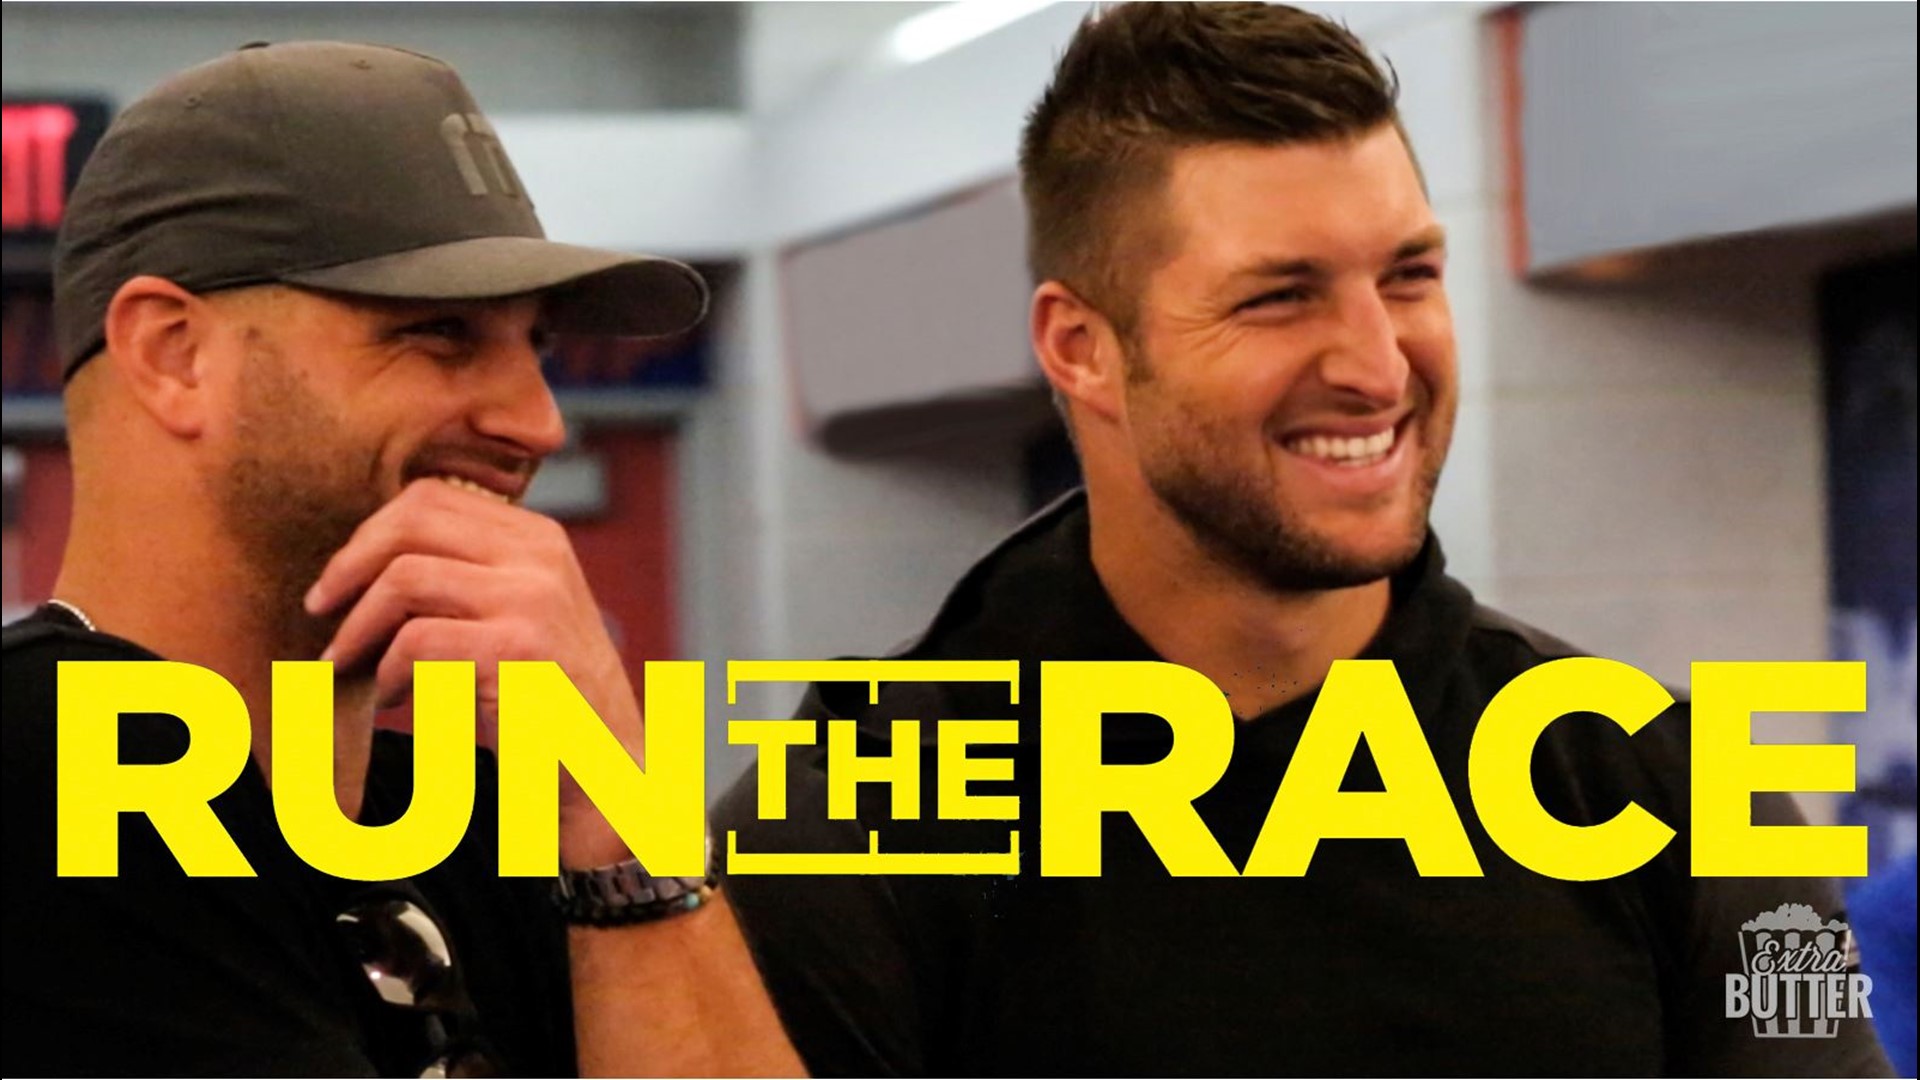 Tim Tebow, best known as a football and baseball star, talks about his new gig producing movies. Tebow also explains why 'Run the Race' is important to him. Mark S. Allen also takes a moment to give Tebow some marriage advice. Interview provided by Roadside Attractions.